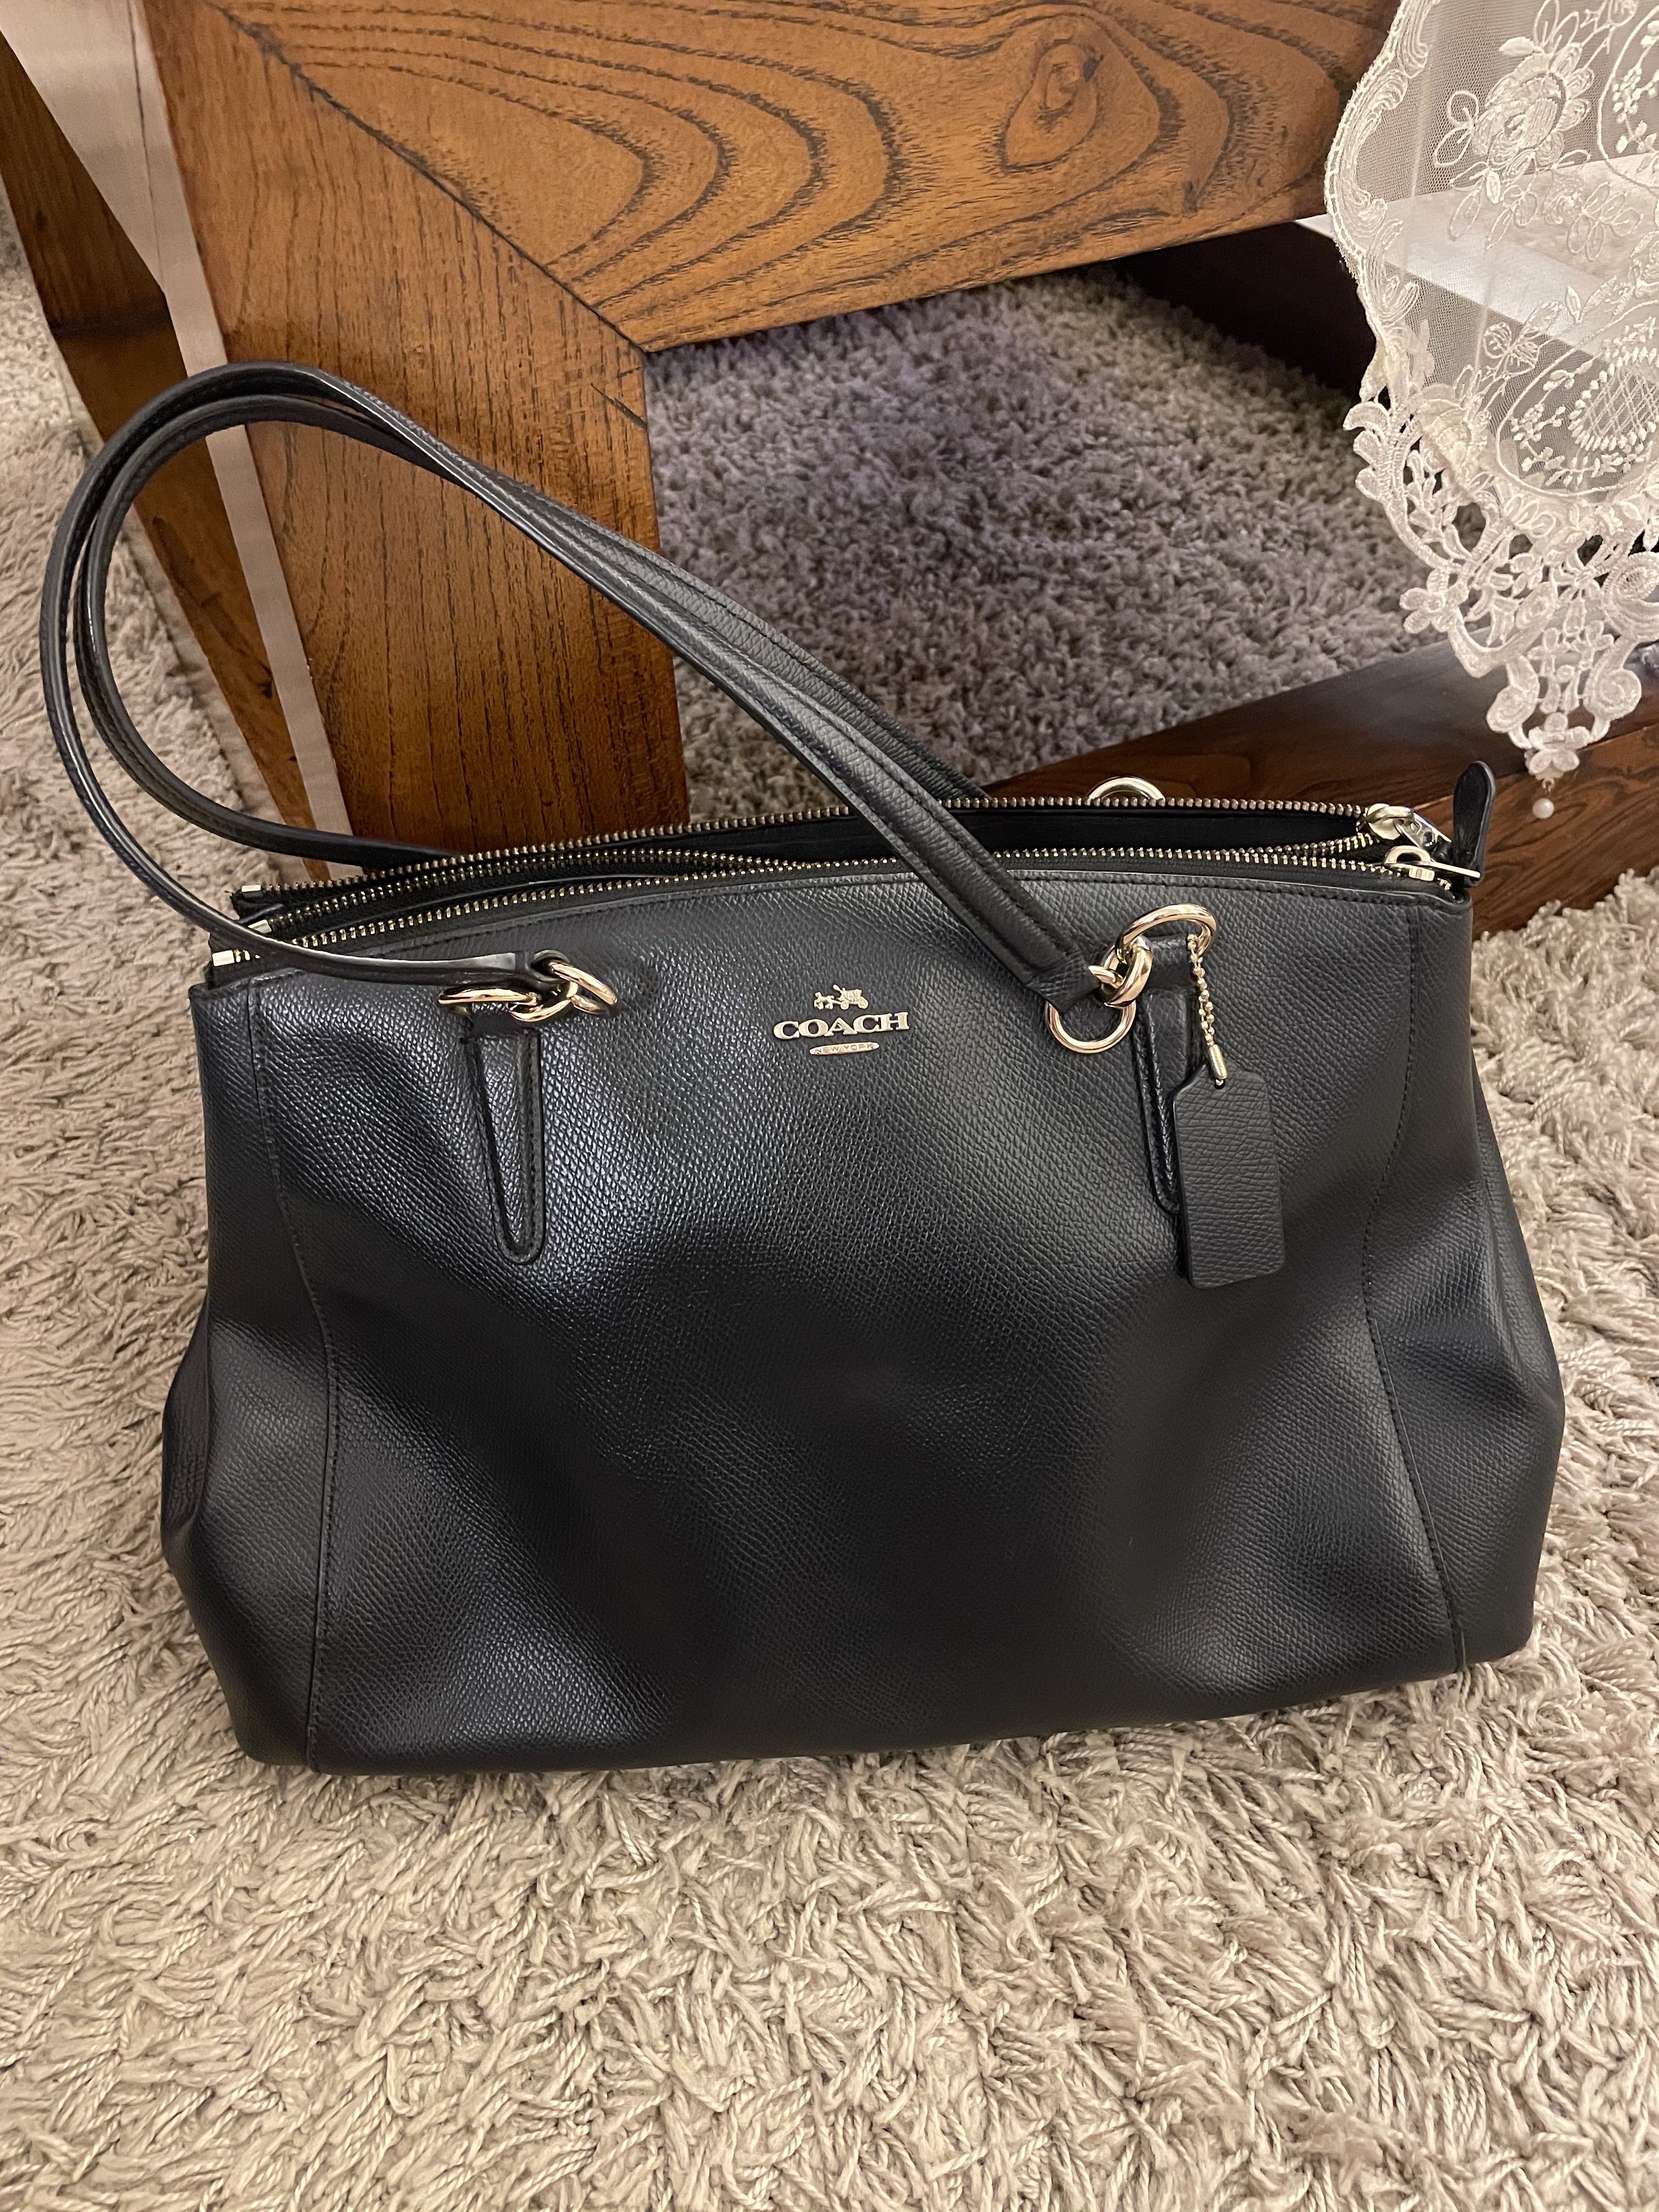 Coach Black Leather Double Zip Tote